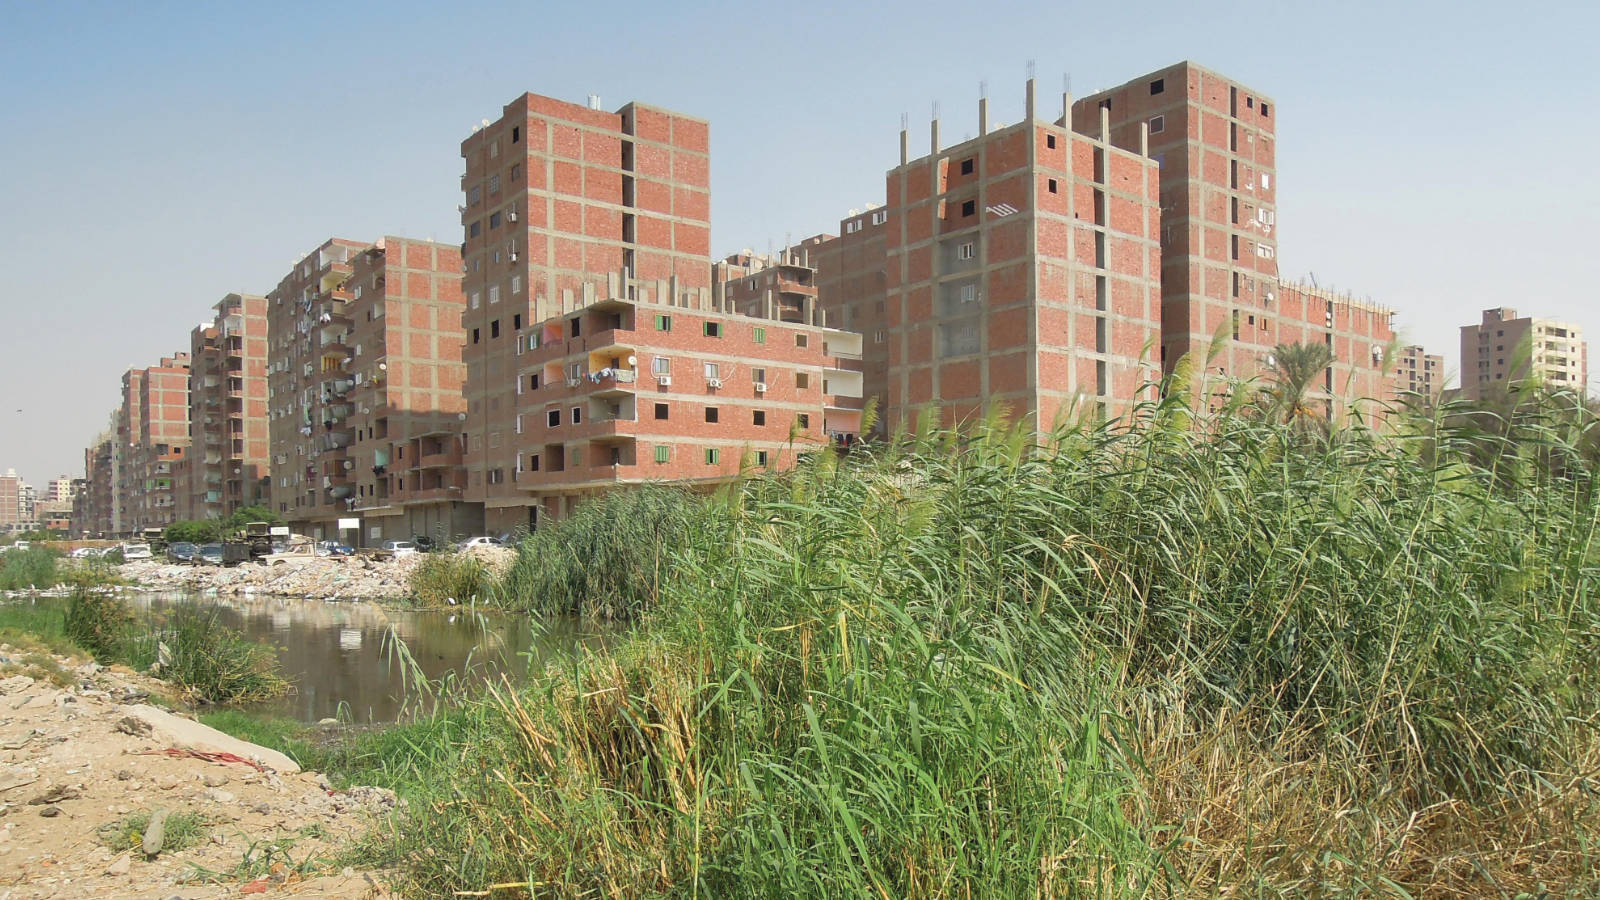 Informal settlement on agricultural land in Greater Cairo